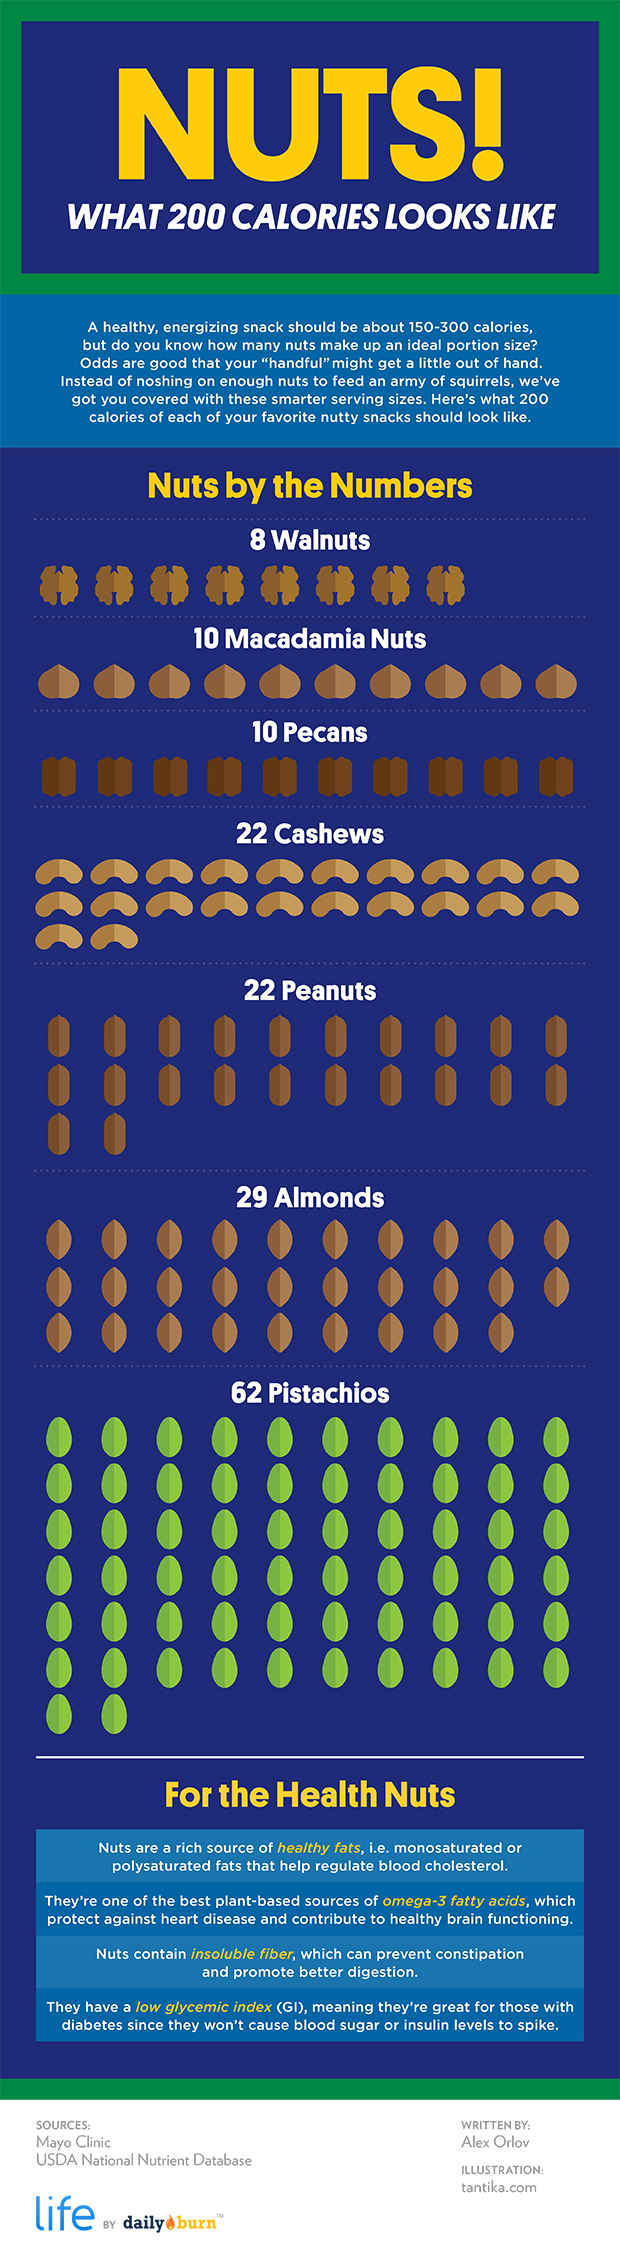 For getting your nuts straight. | 24 Diagrams To Help You Eat Healthier